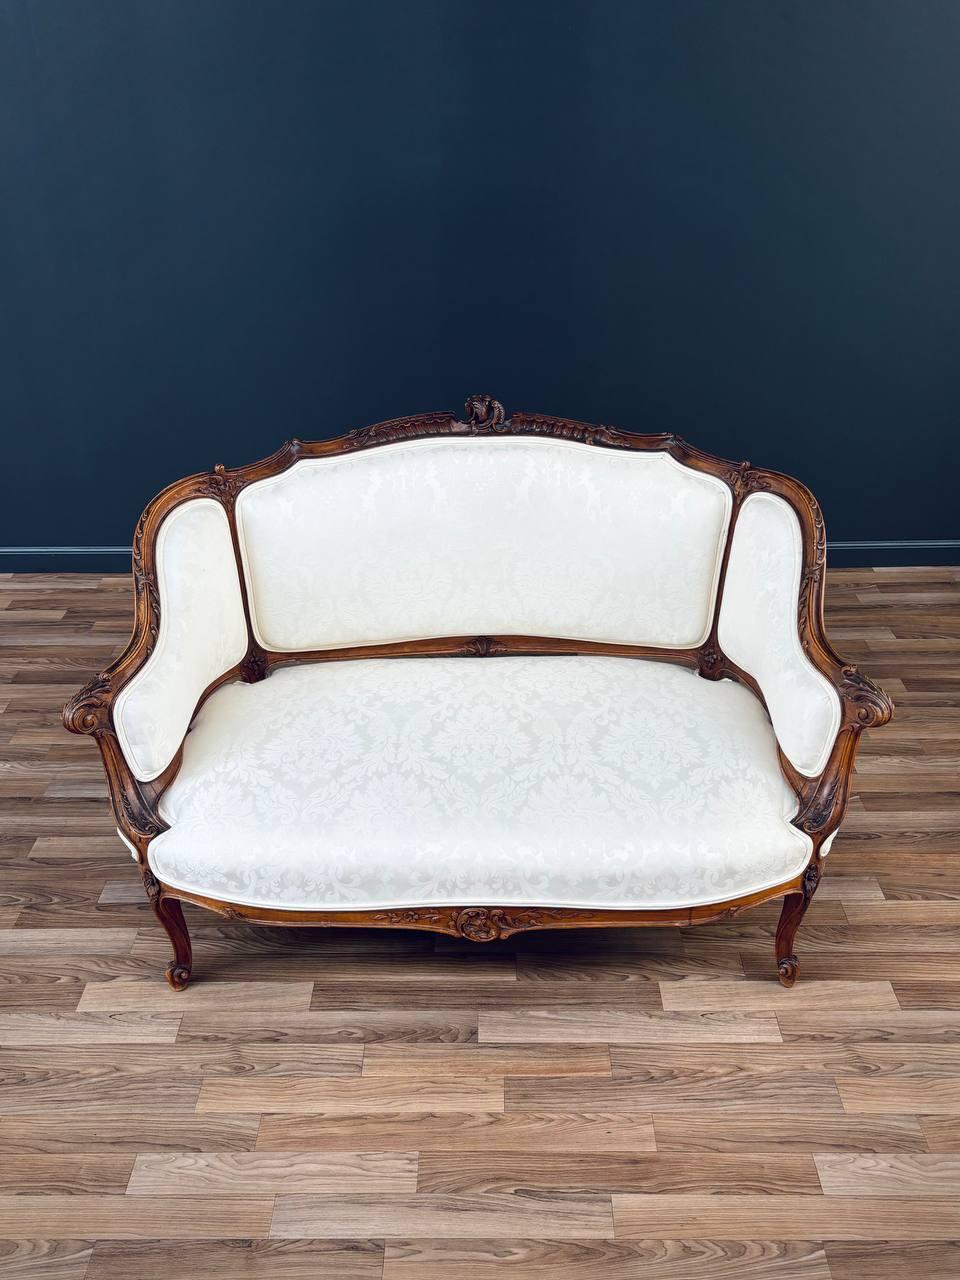 Mid-20th Century French Antique Louis XV-Style Love Seat Sofa